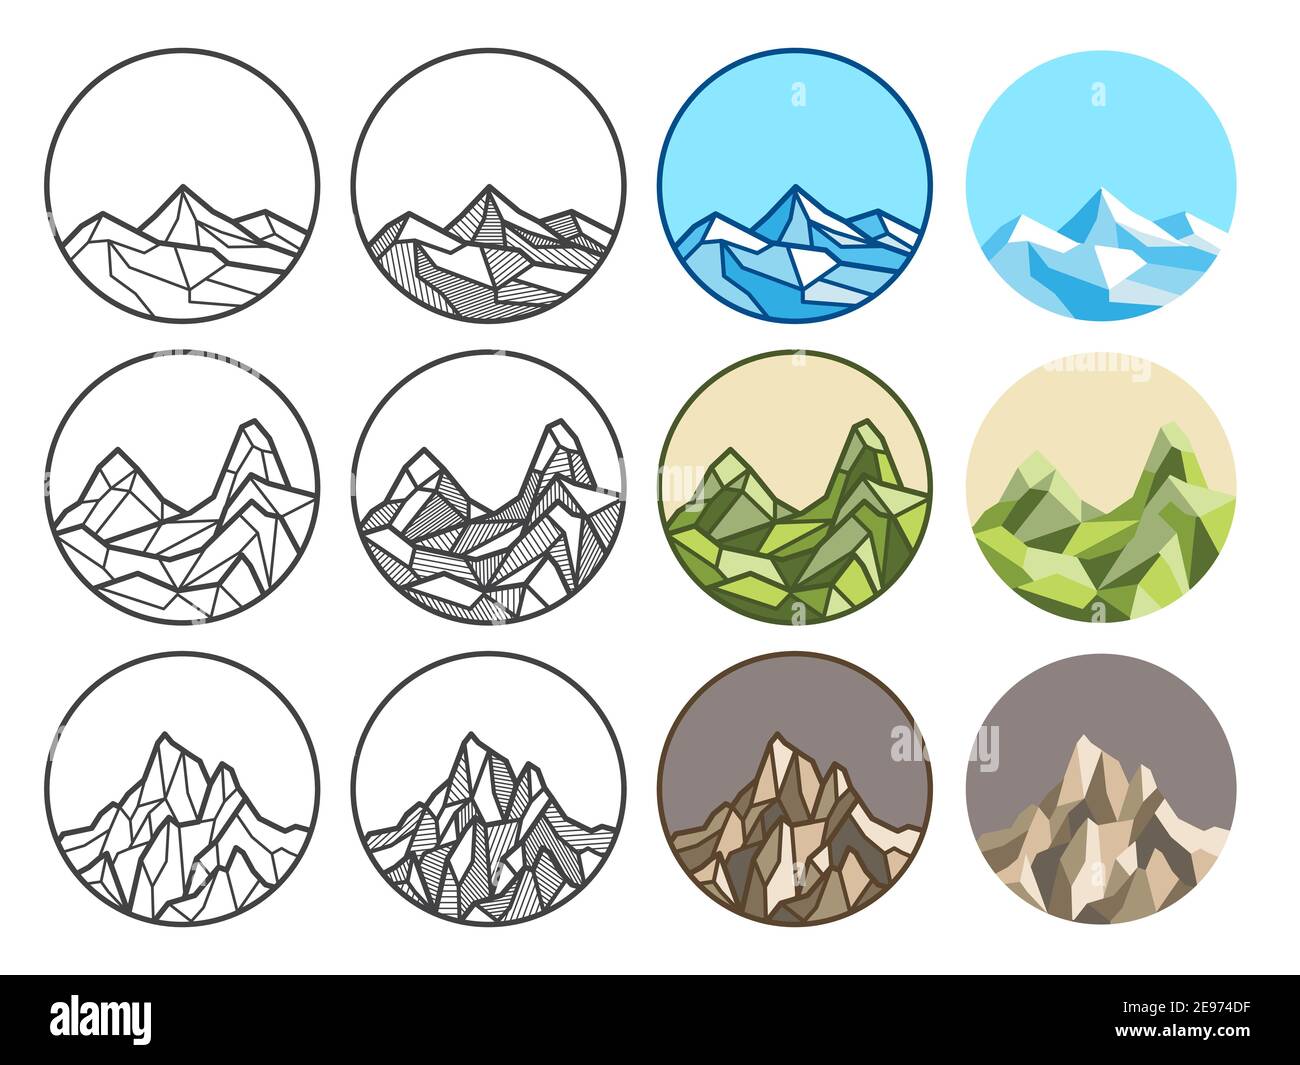 Mountain line art polygon vector illustration. Linear,shadow,colored line,flat styles. Design in round shape and copy space for decoration and logo de Stock Vector